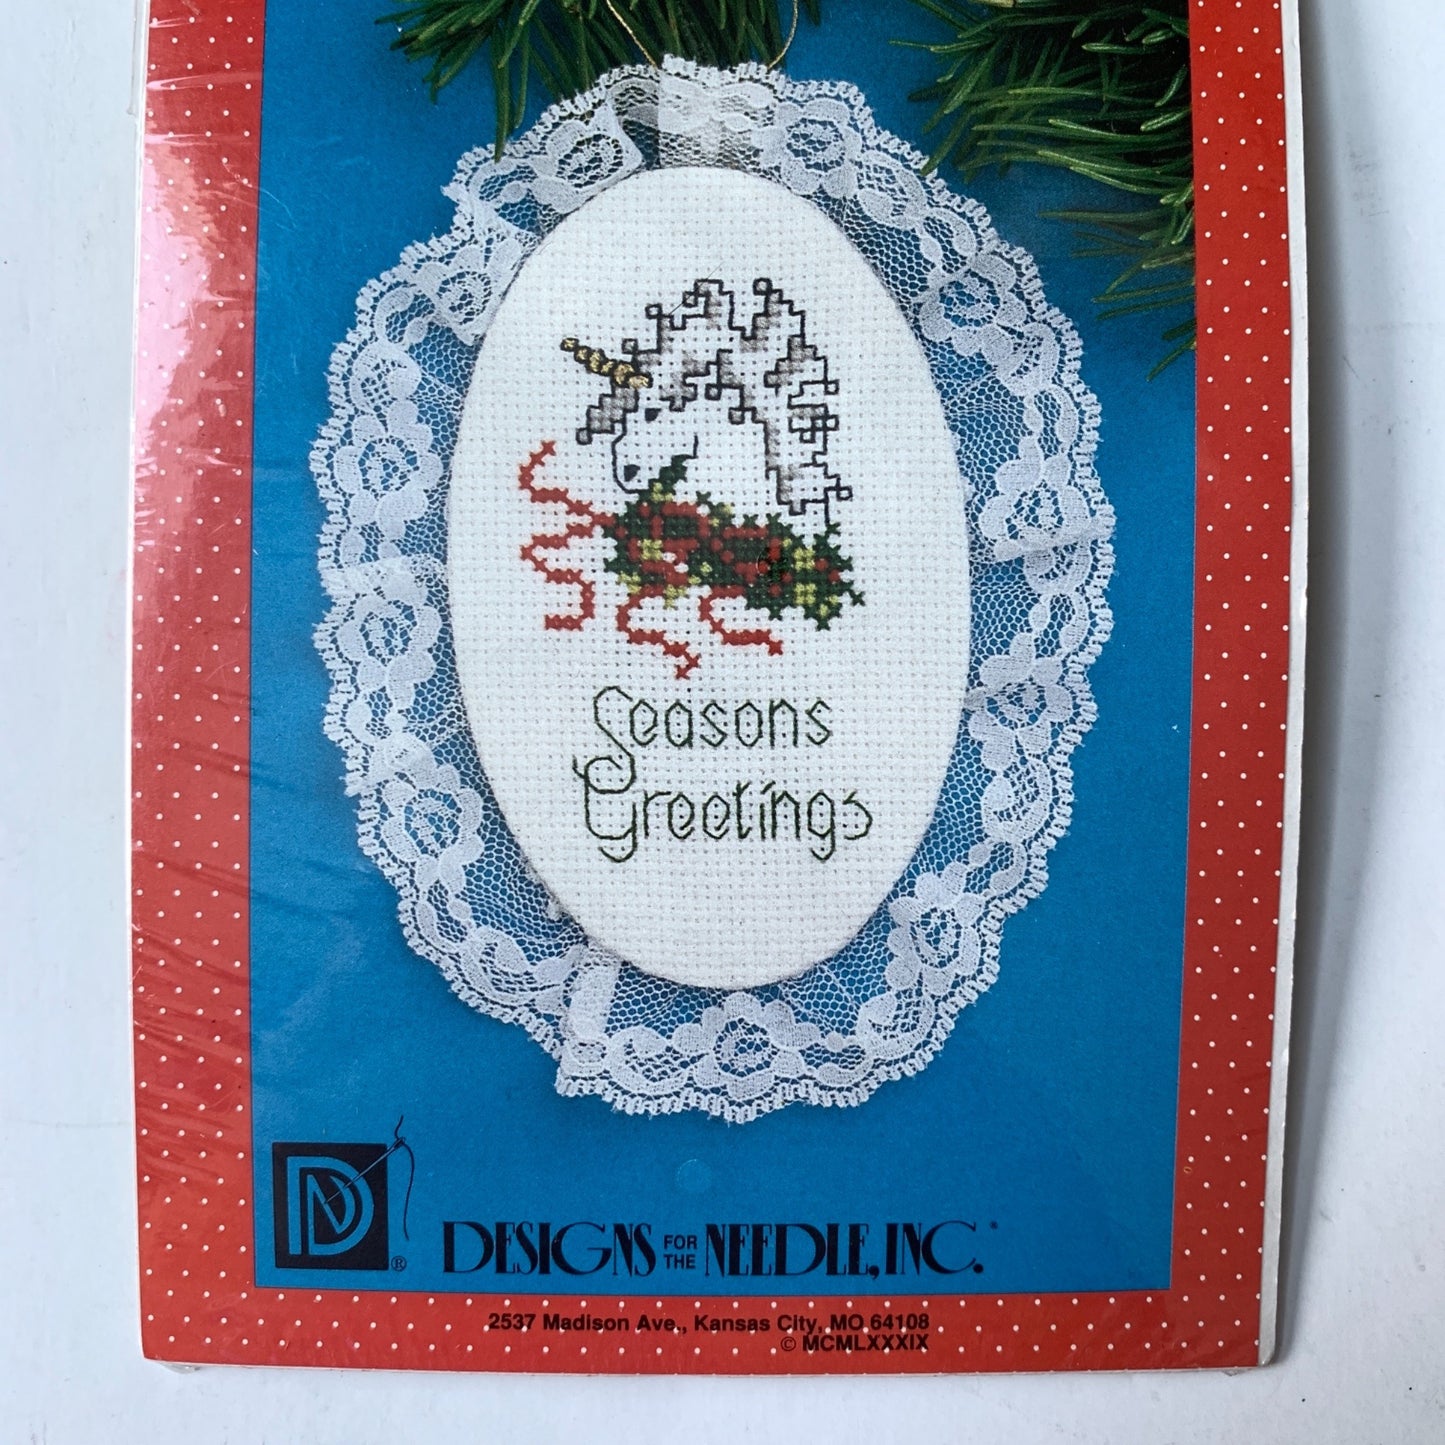 DESIGNS FROM THE NEEDLE CHRISTMAS LACE ORNAMENT CROSS STITCH KIT "UNICORN"